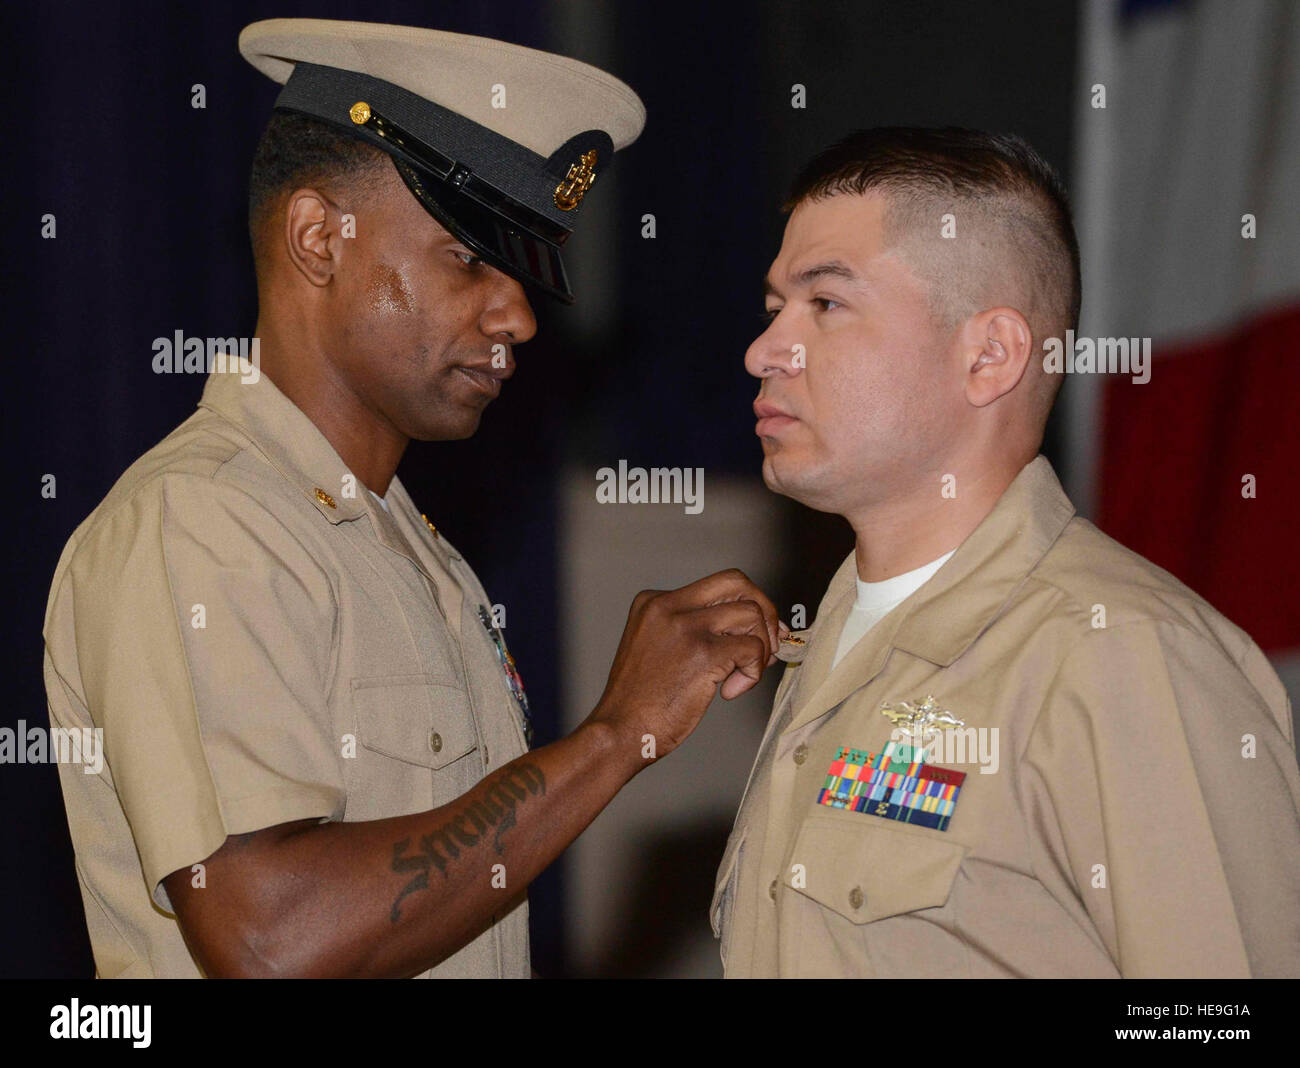 150916-N-QY316-093    NAVAL BASE KITSAP – BREMERTON, Wash. (Sep. 16, 2015) Chief Religious Program Specialist Juan Bejarano, assigned to the aircraft carrier USS Nimitz (CVN 68), receives his anchors from Chief Religious Programs Specialist Stanley Ponder, during Nimitz’ chief pinning ceremony held at Naval Base Kitsap-Bremerton.  Twenty-one Sailors on board Nimitz were selected and pinned to the rank of chief petty officer, after having participated in an intense, six-week program intended to train first class petty officers on the roles and responsibilities of becoming a chief. Mass Communic Stock Photo